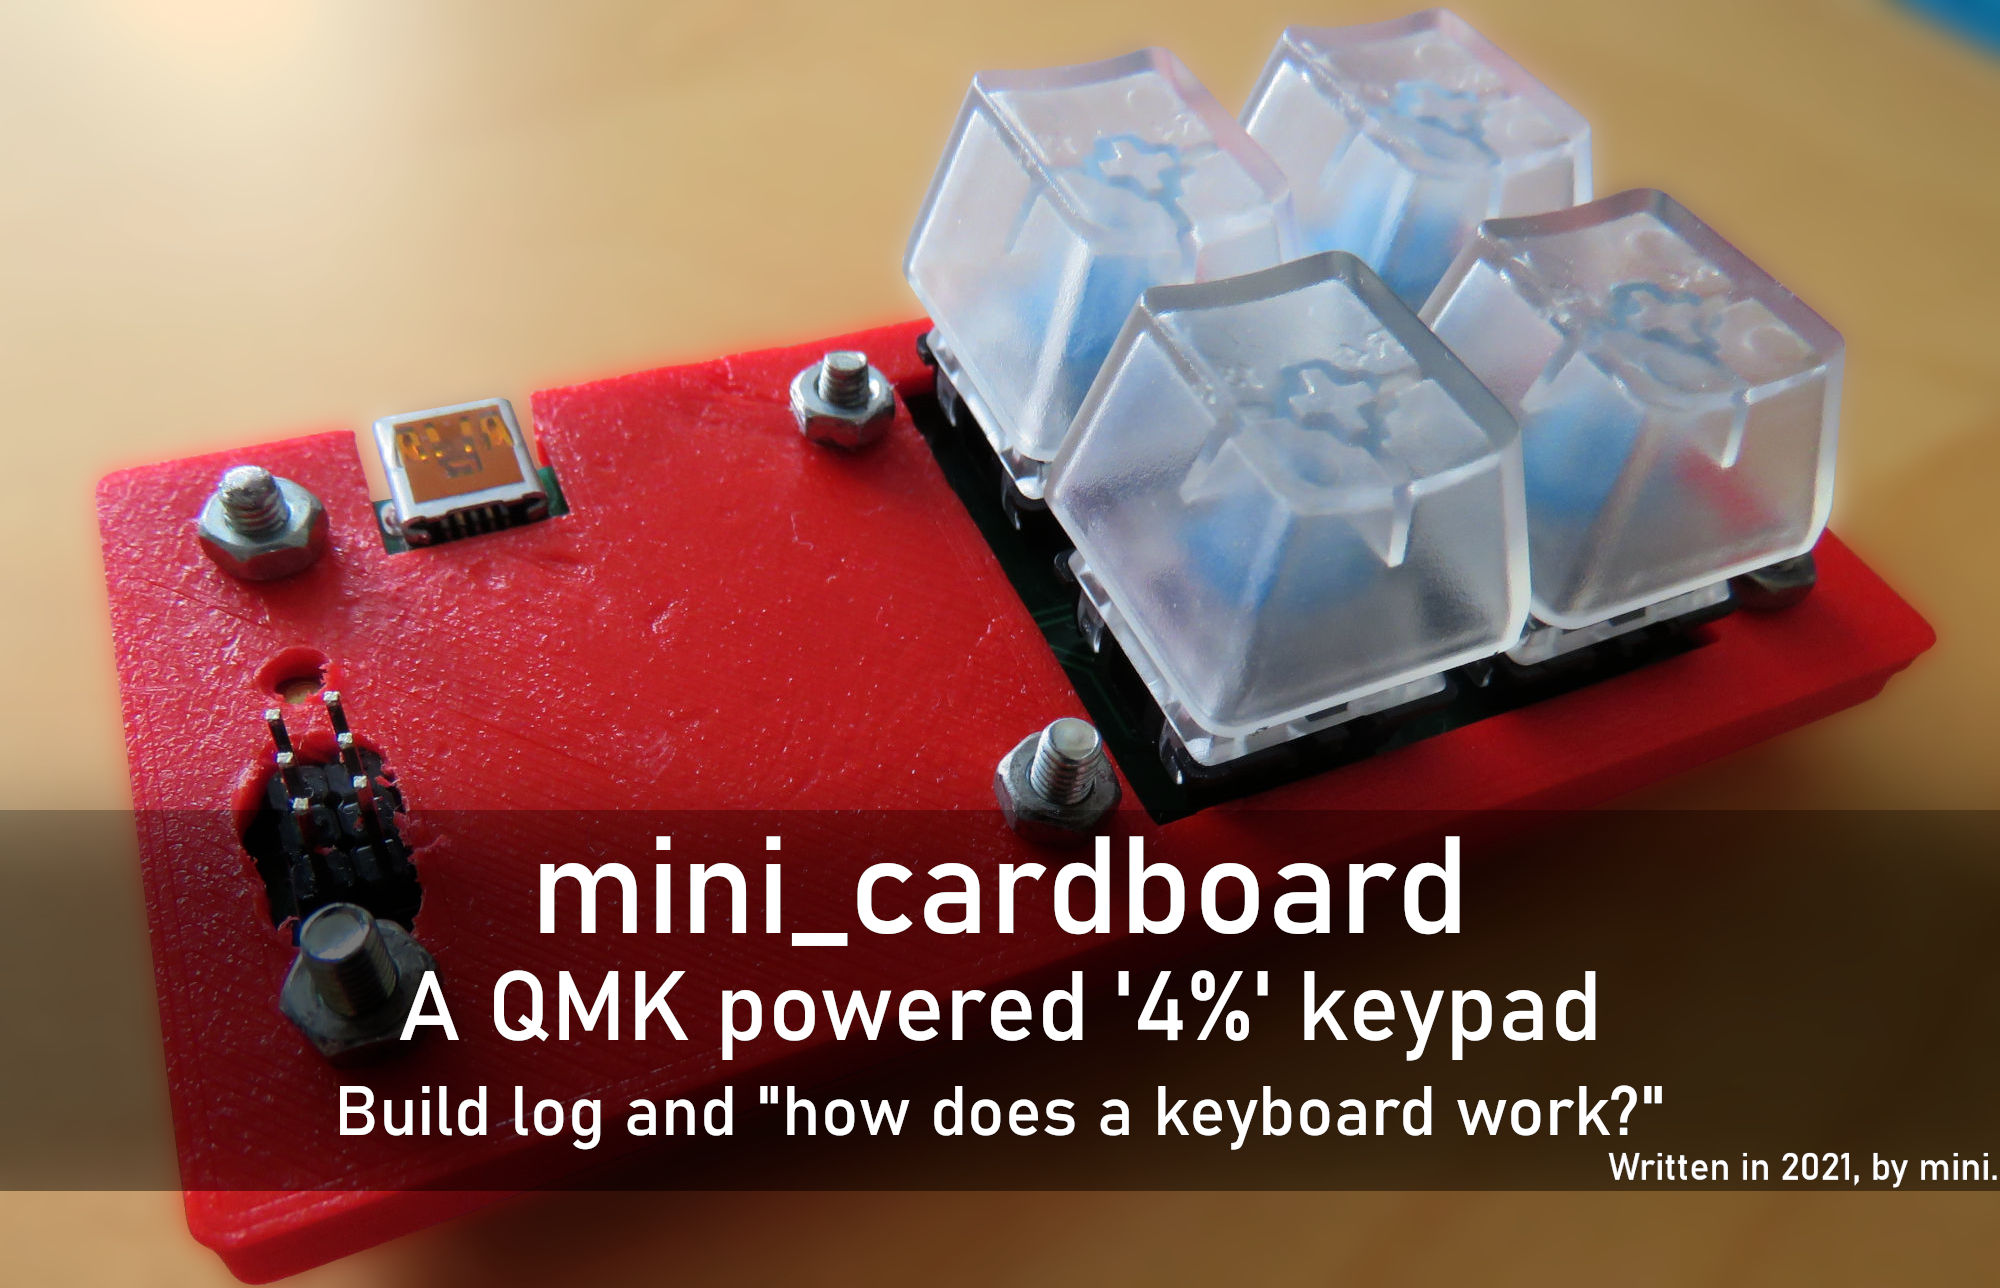 Cherry MX Switches 3-Pin 5-Leg Replacement of Kailh Gateron and Clones for  Mechanical Keyboards